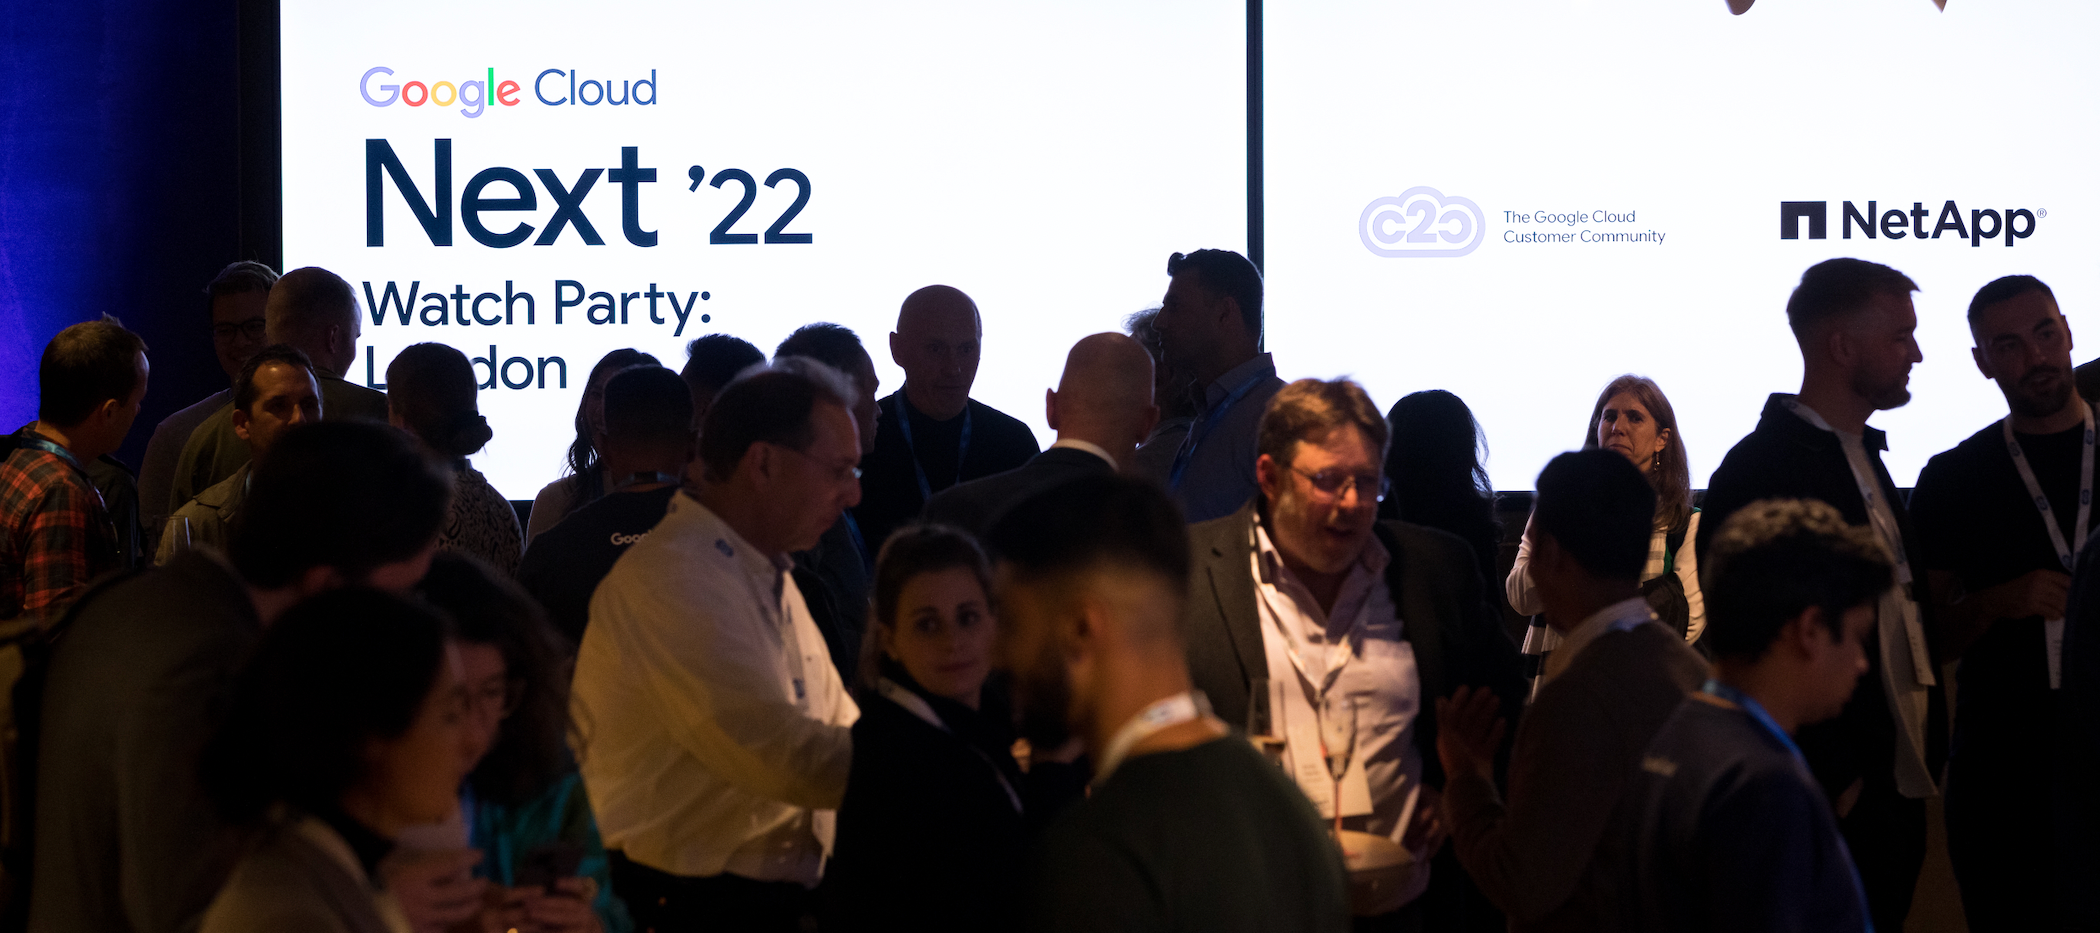 Community-Building and New Solutions at C2C's EMEA Next '22 Watch Parties